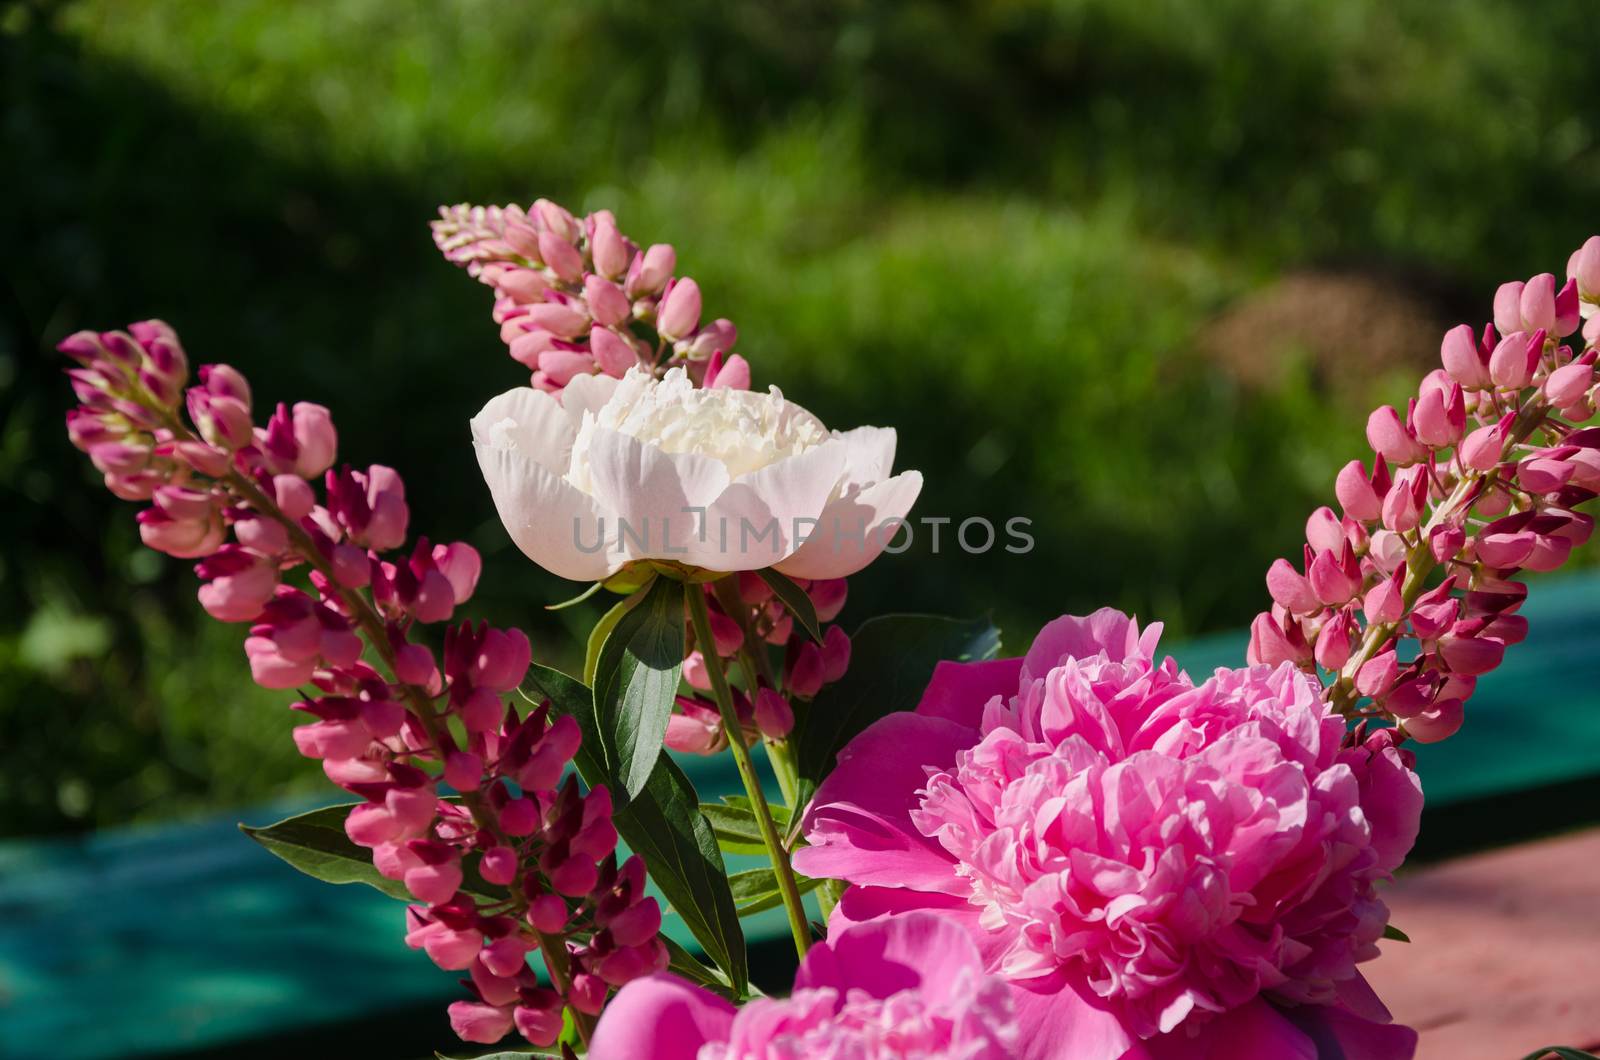 peony and lupine bouquet on green grass background by sauletas